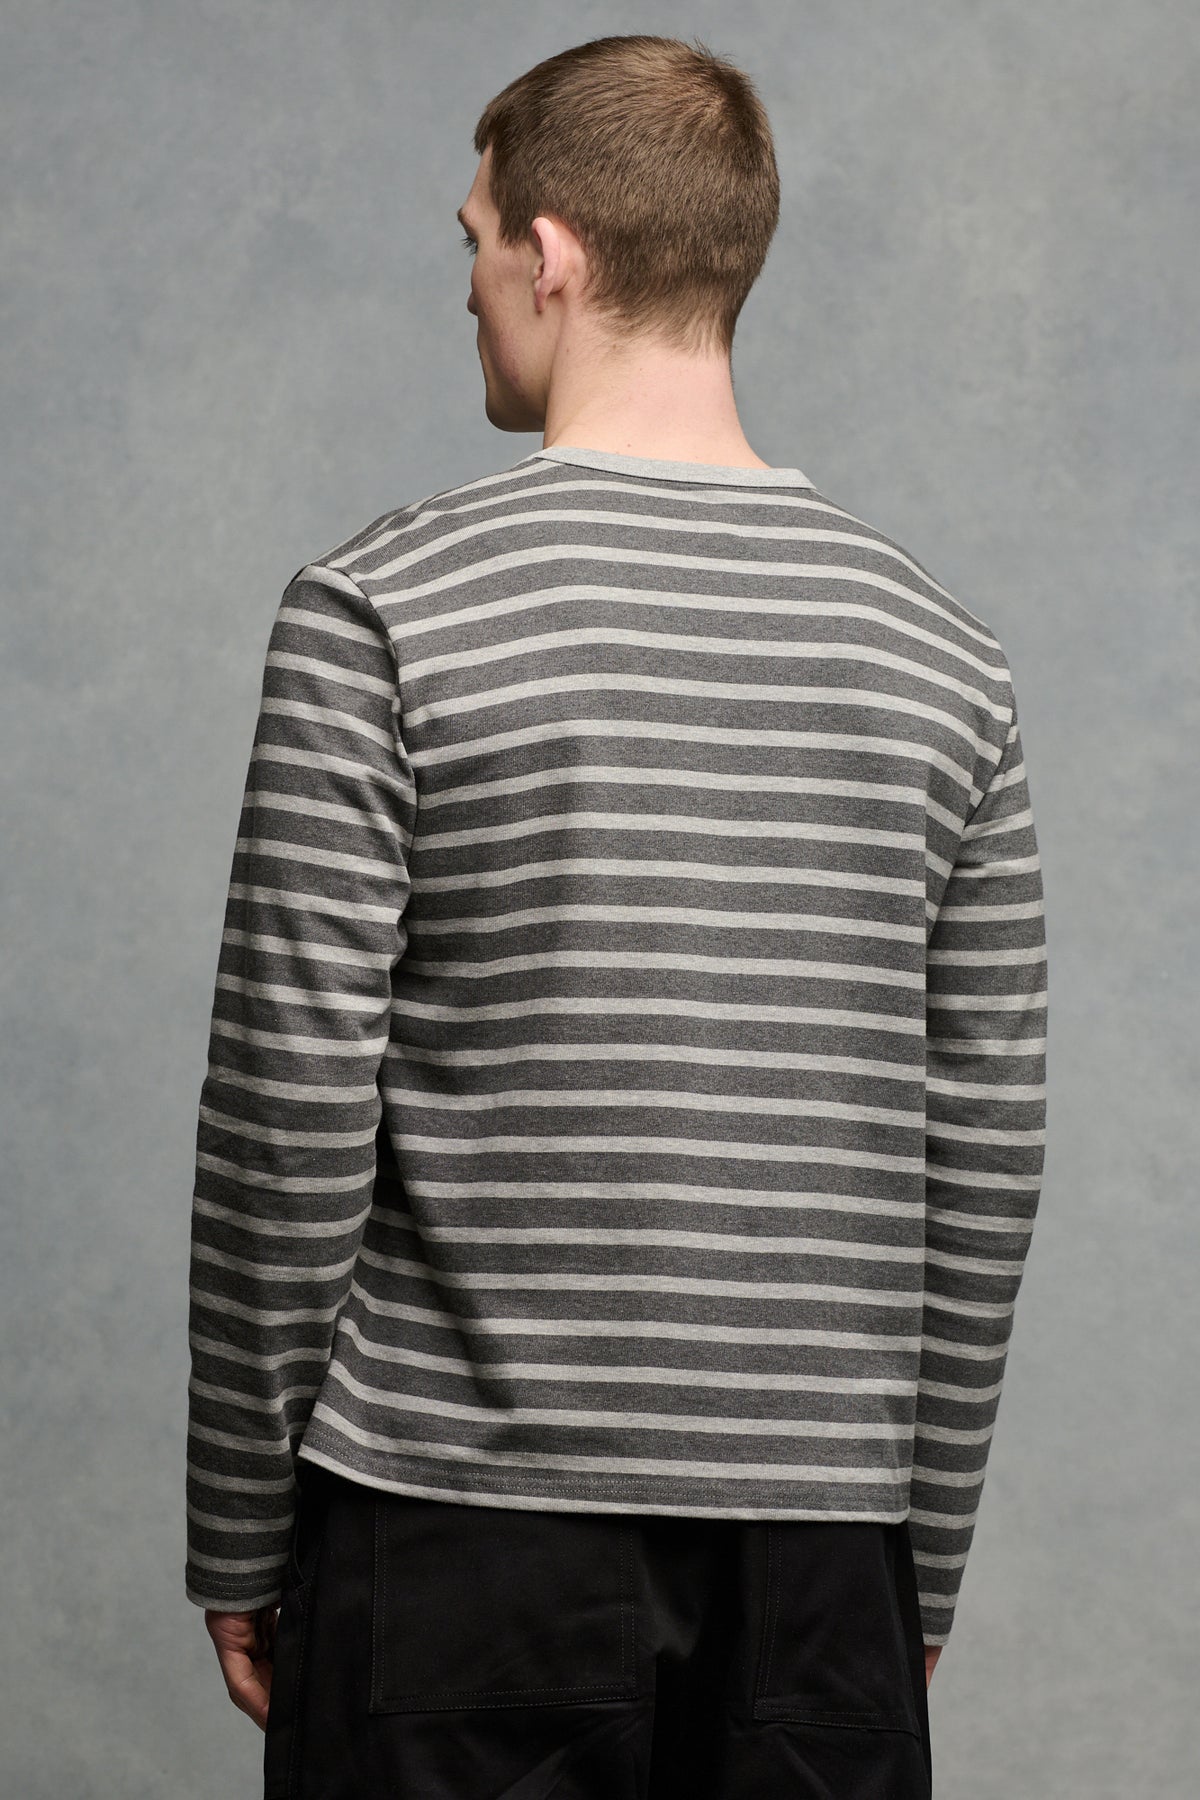 
            thigh up of the back of male wearing charcoal/grey Breton